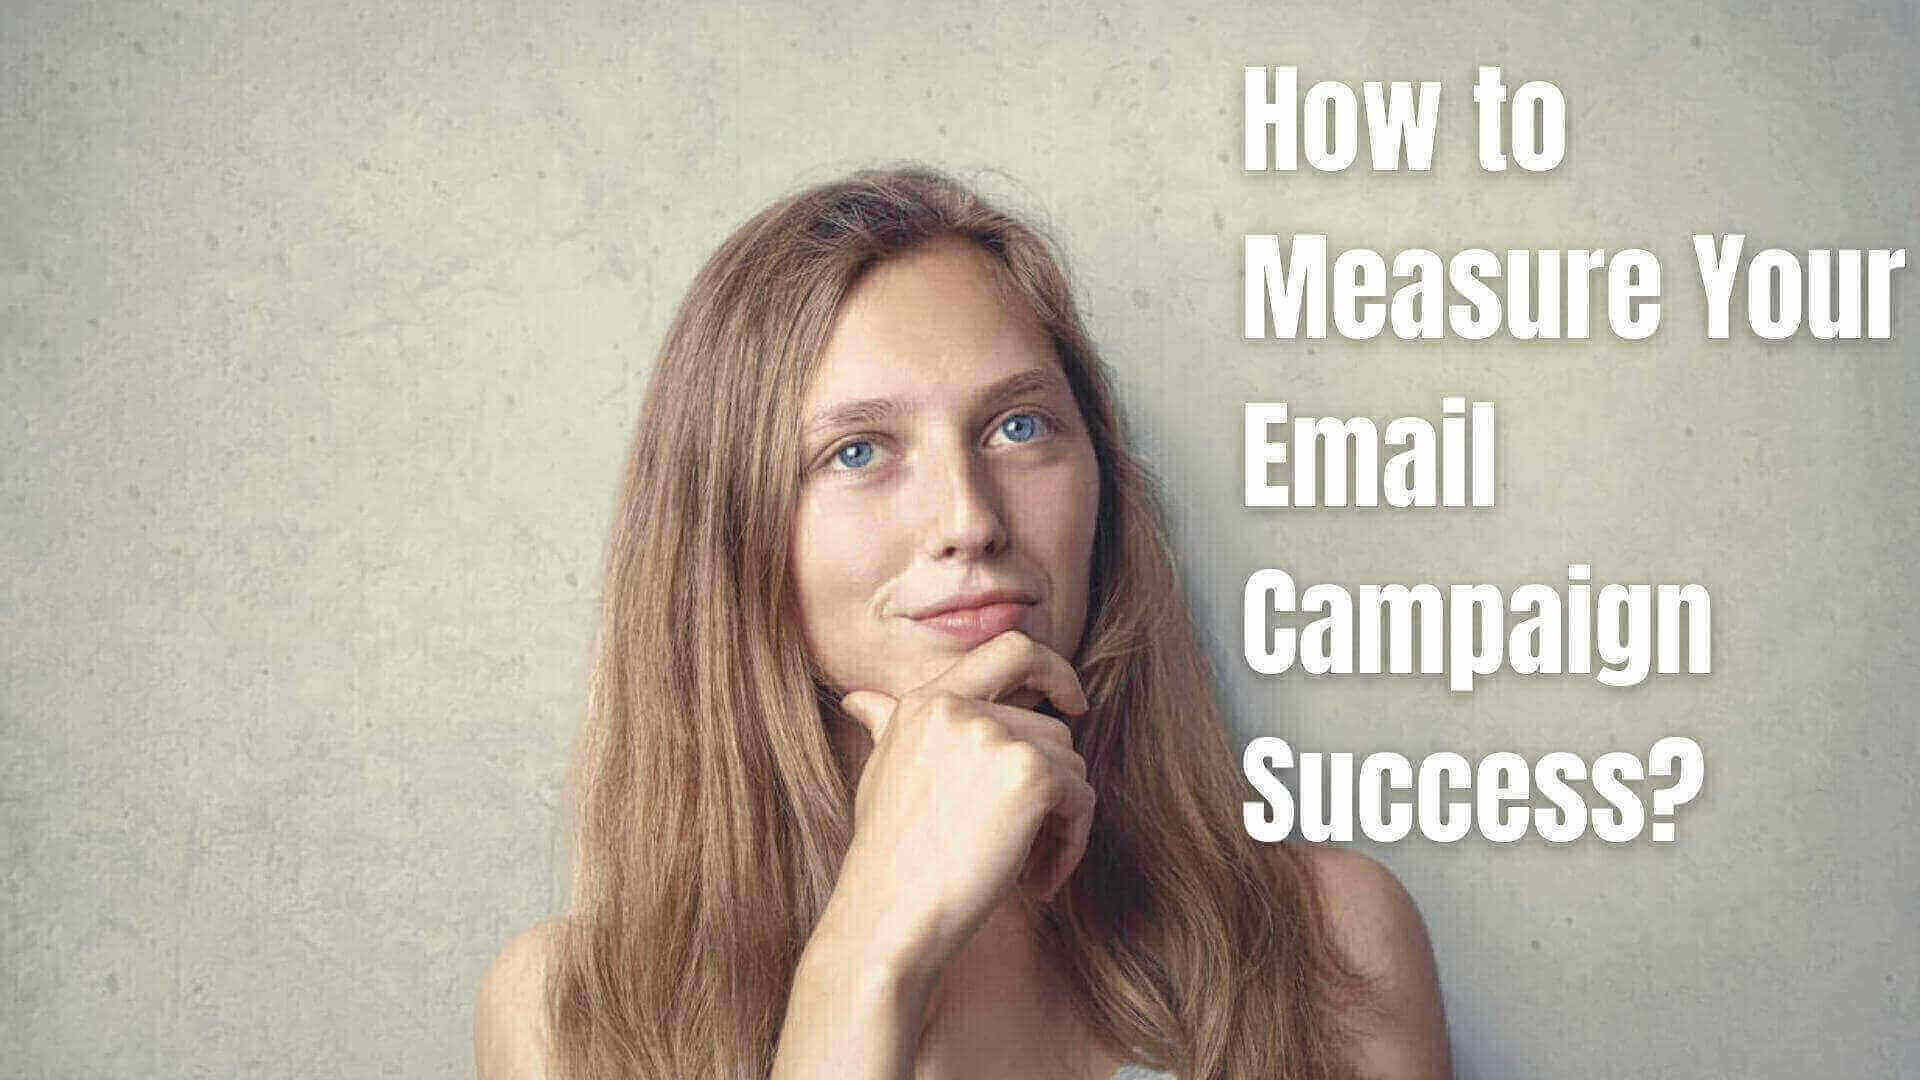 How to Measure Email Campaign Success & Increase It's Effectiveness